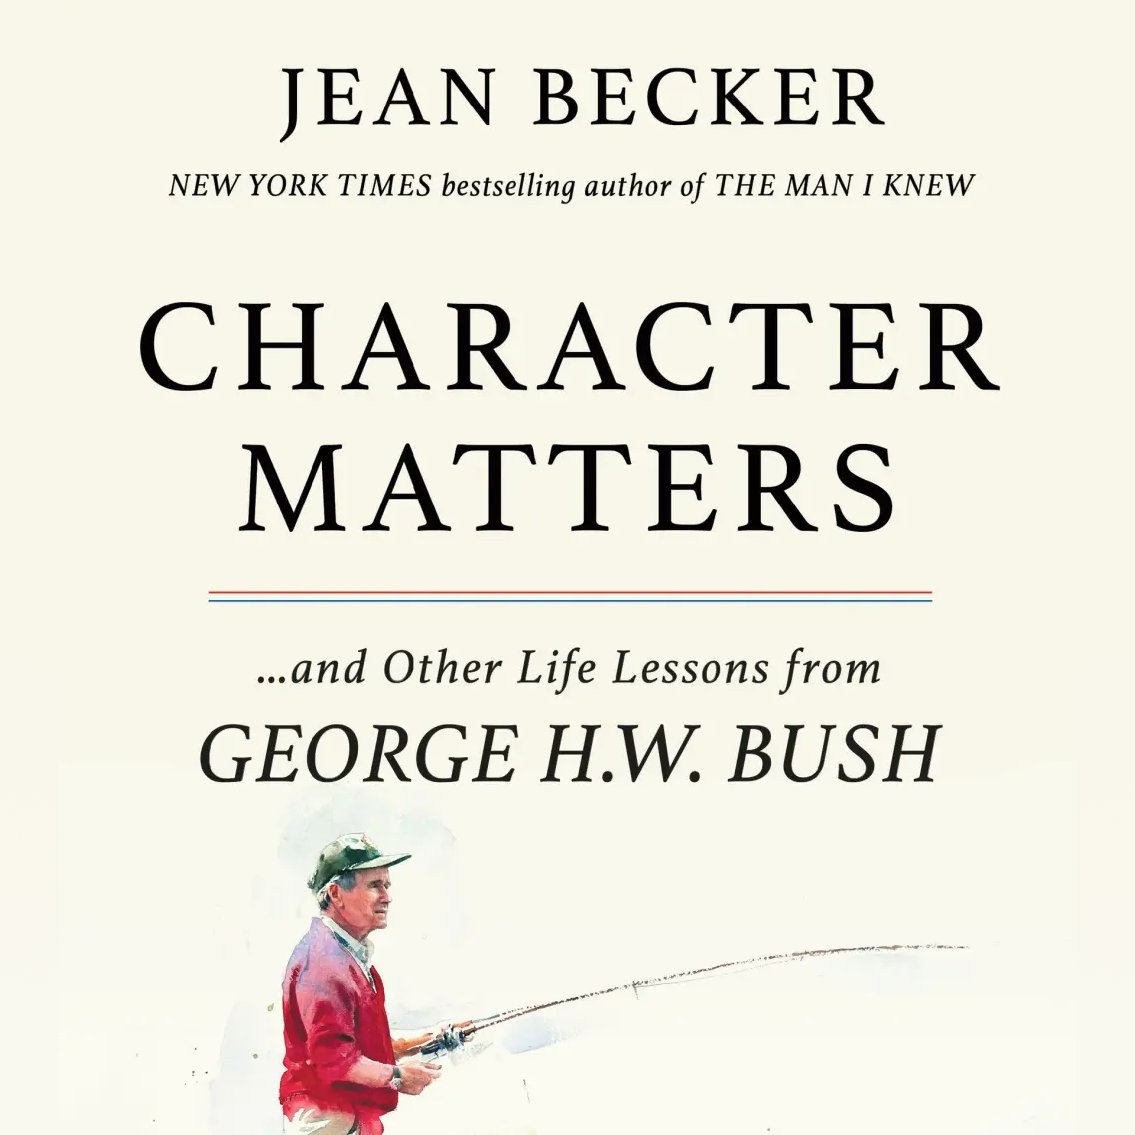 Our friend Jean Becker, who served as President George H.W. Bush's Chief of Staff for more than two decades, shares touching and pivotal life lessons from a leader who left a mark on people's hearts and souls in her new book, 'Character Matters.' rb.gy/8r668p